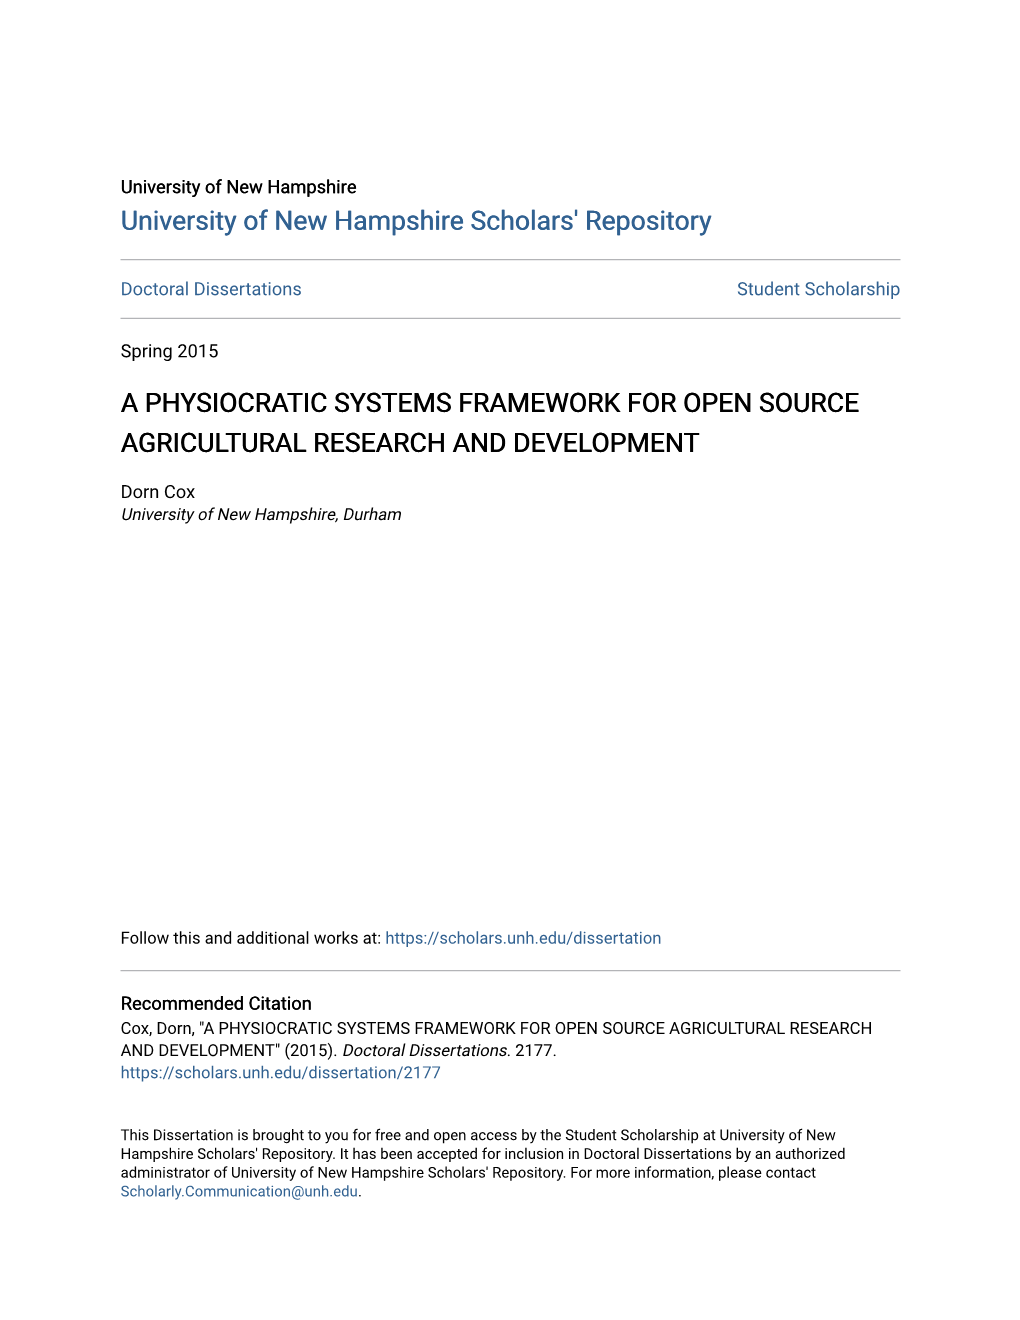 A Physiocratic Systems Framework for Open Source Agricultural Research and Development